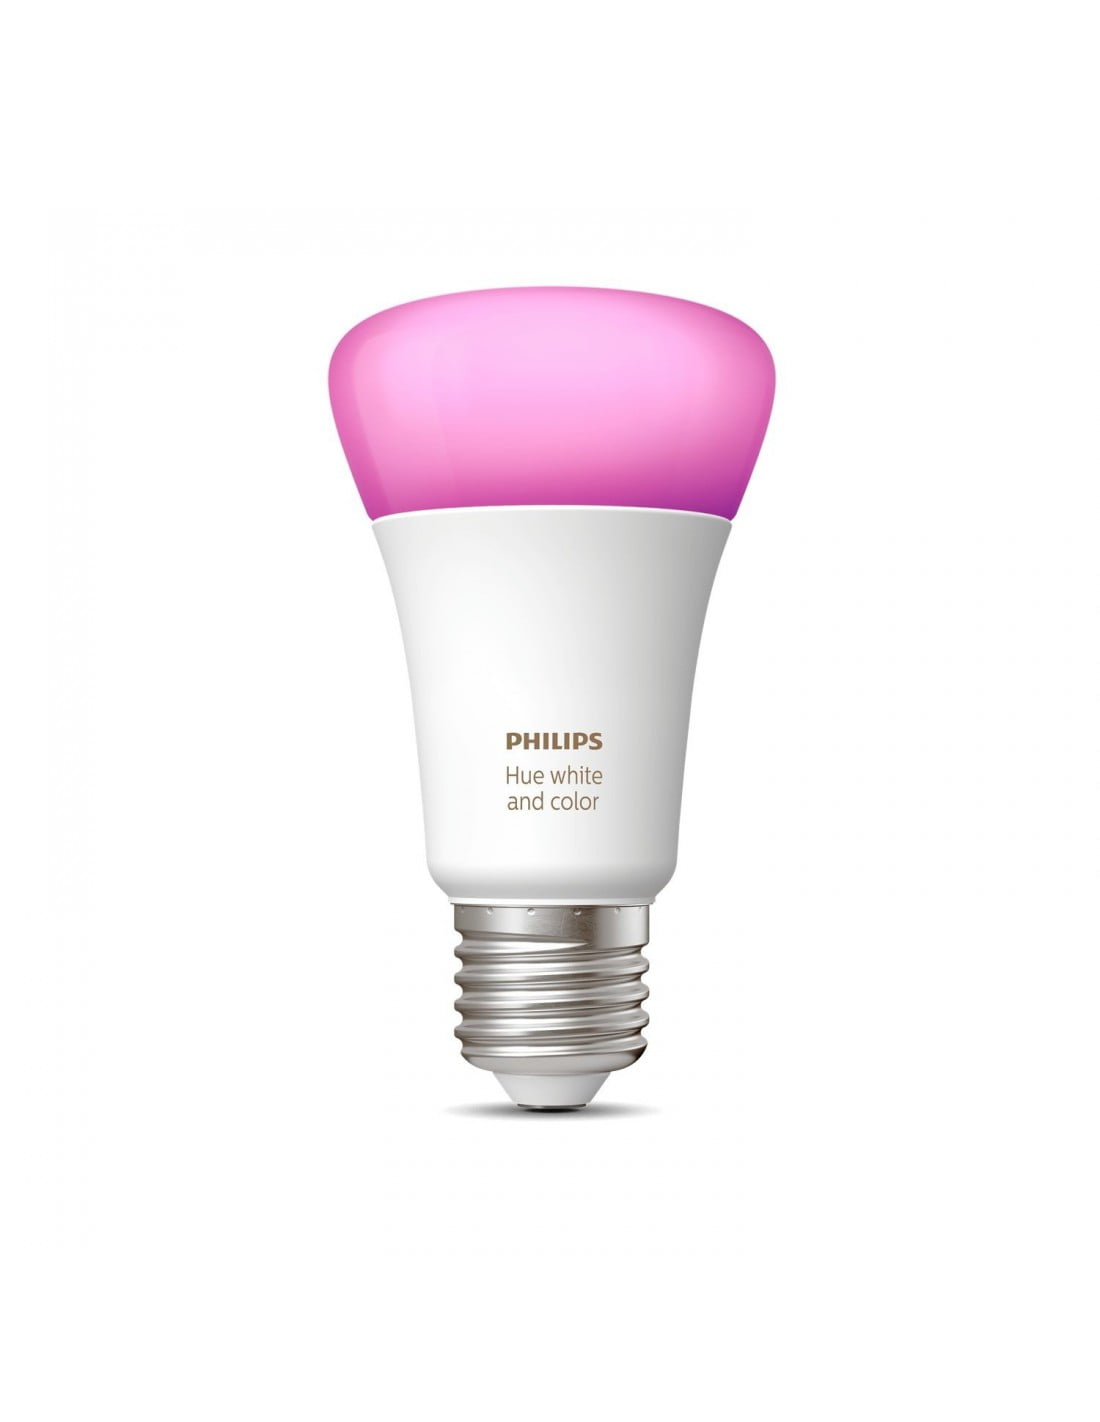 Fill your home with “smart” light compatible with HomeKit thanks to Philips Hue’s offers for PcDays